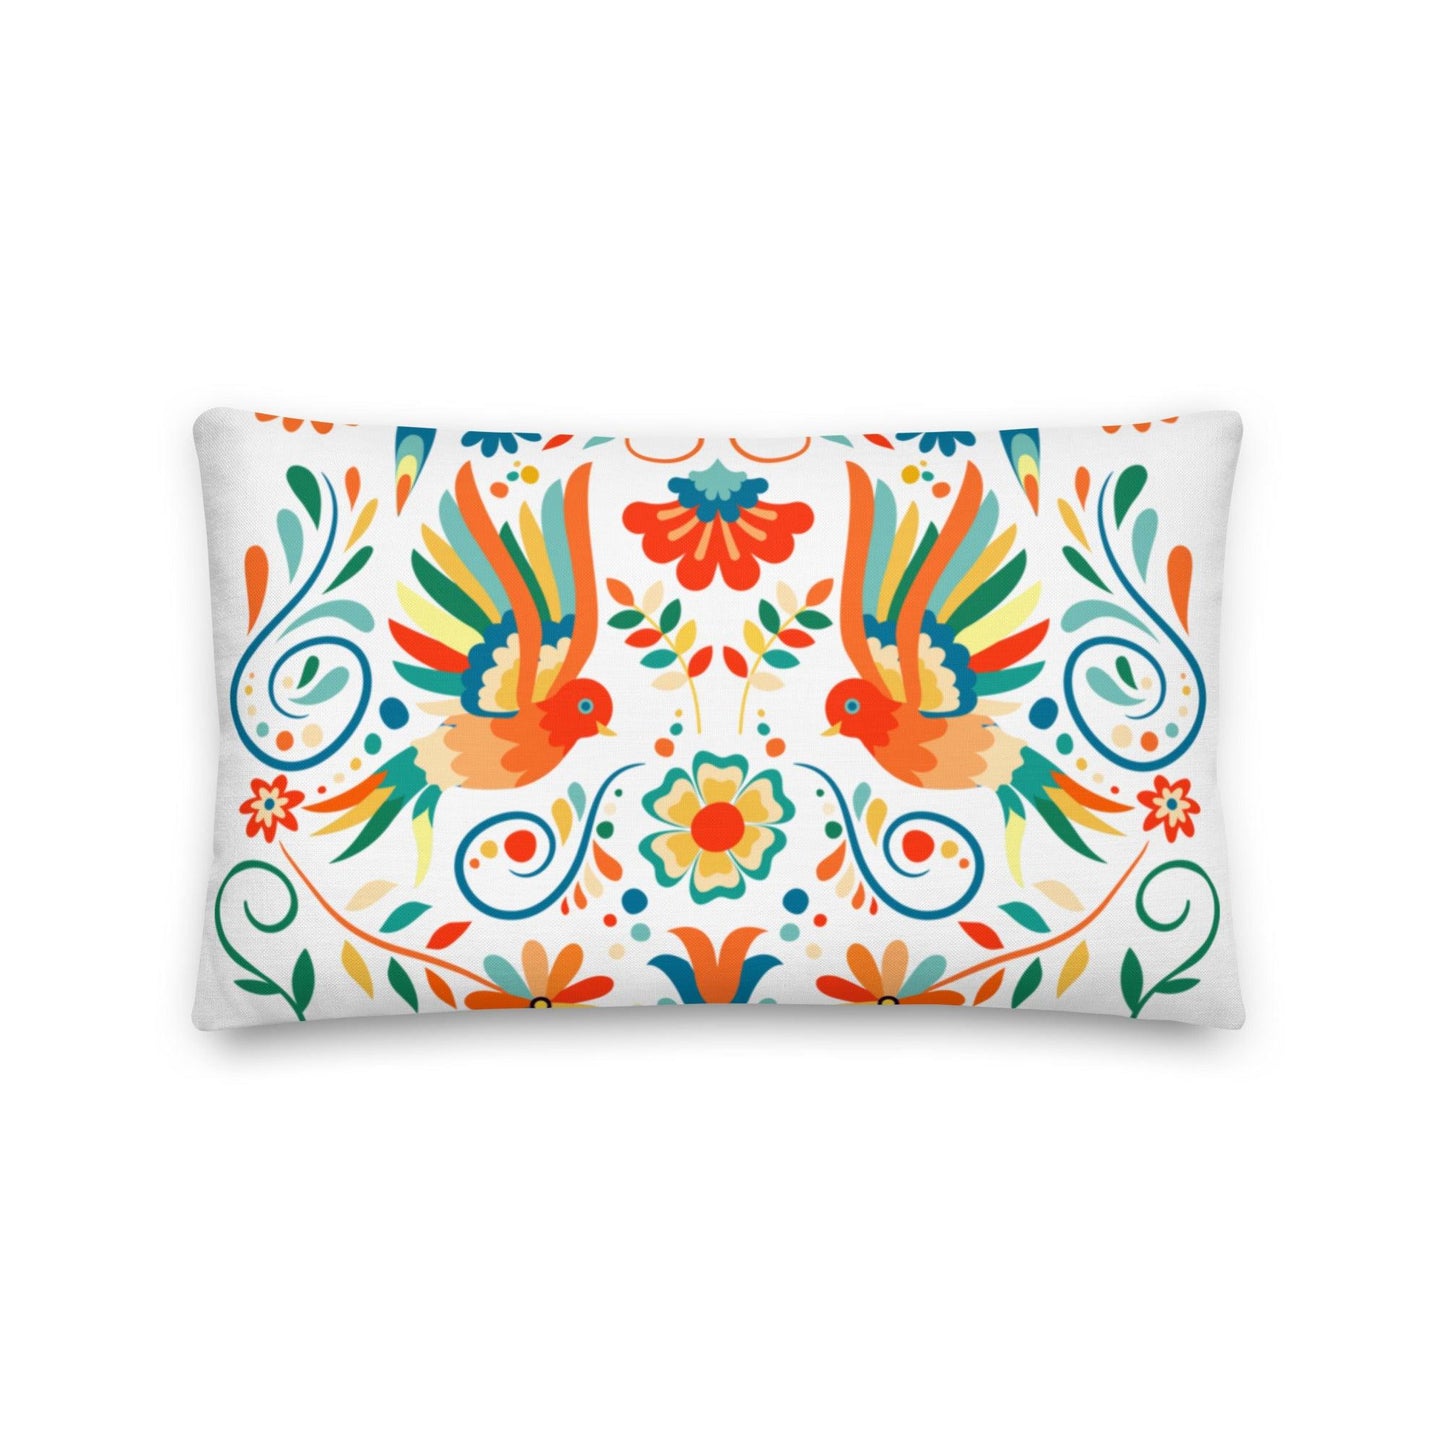 Mexican Otomi Print Throw Pillow - The Global Wanderer